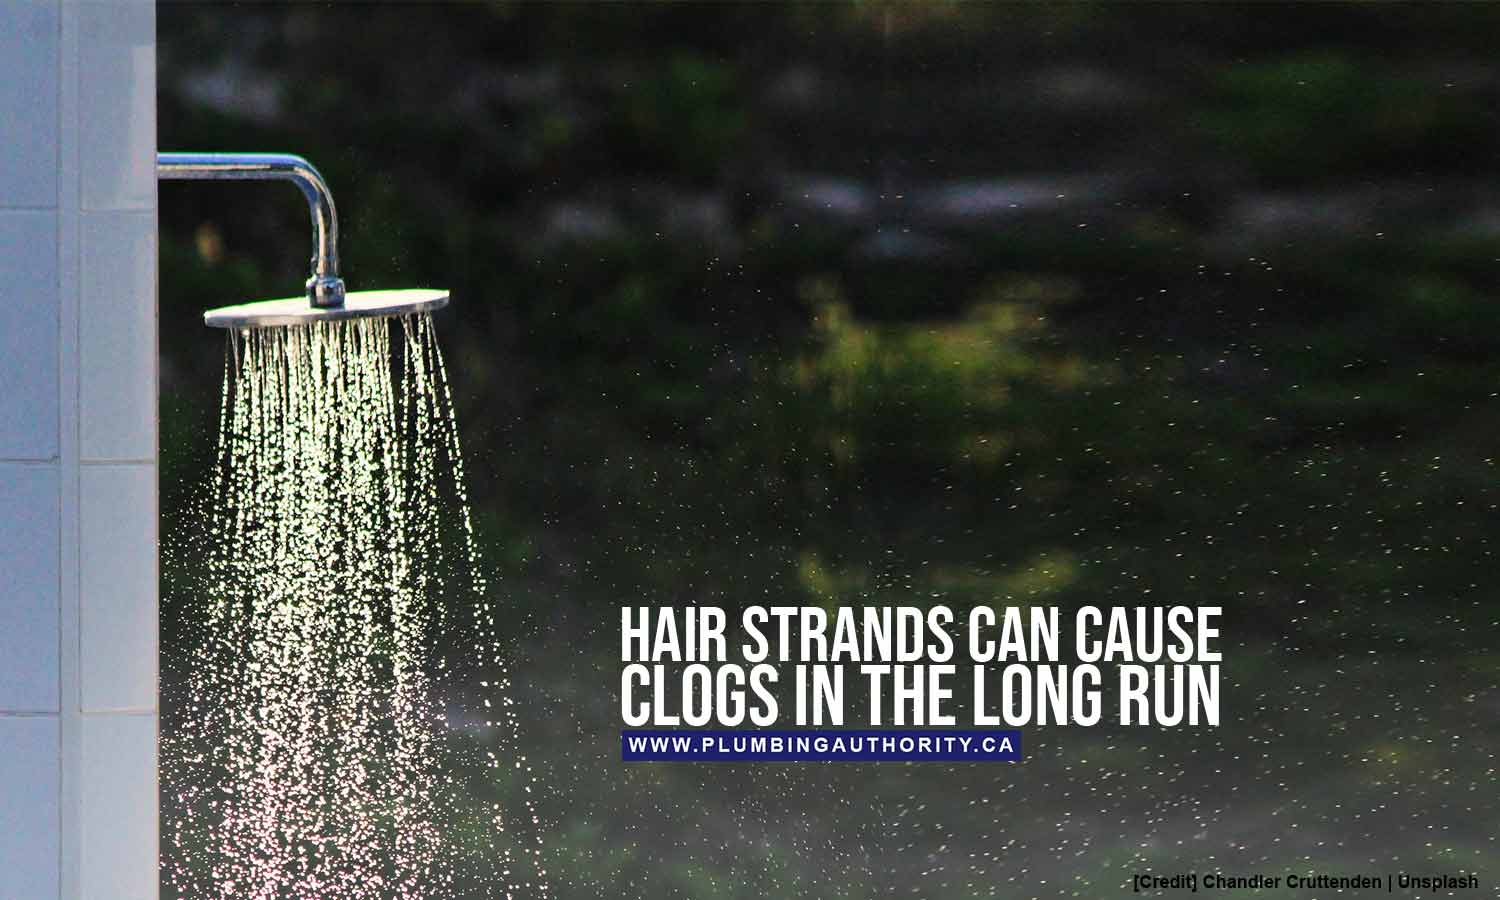 Hair strands can cause clogs in the long run